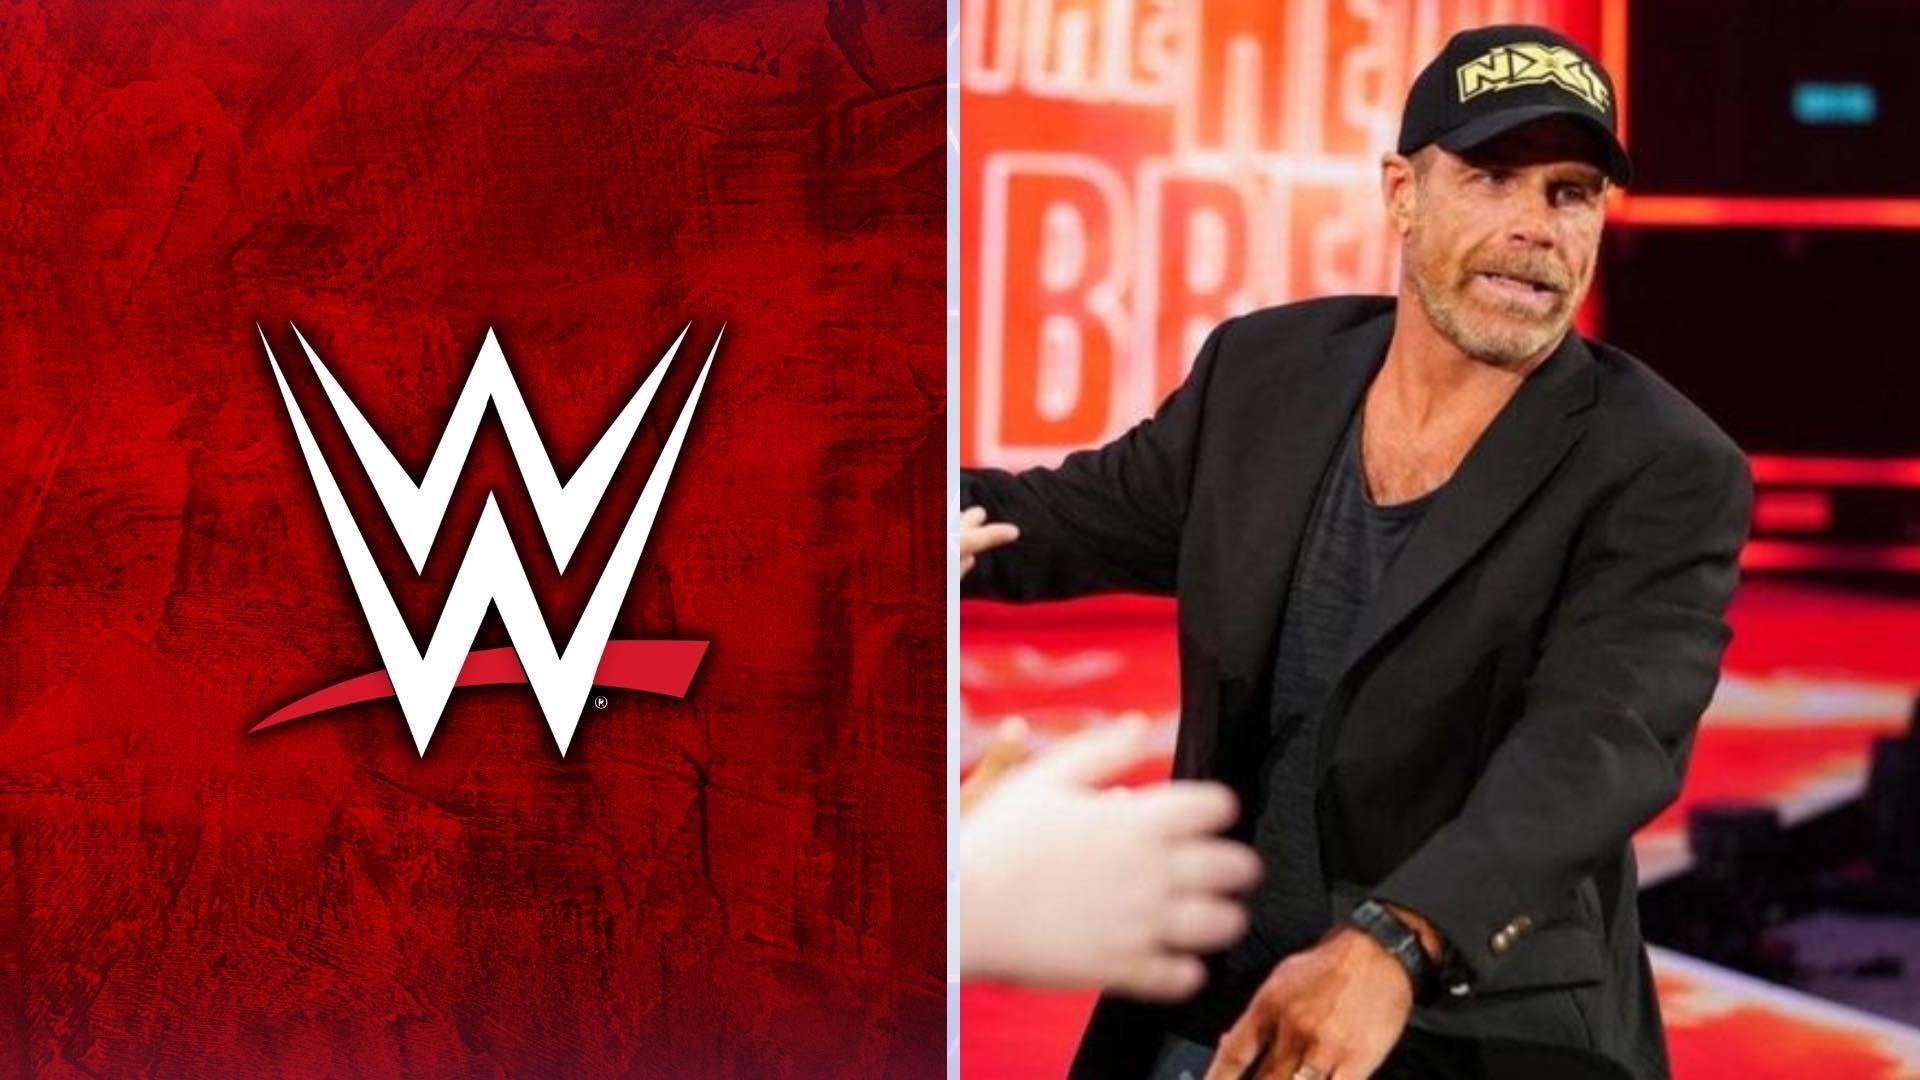 Shawn Michaels was confronted towards the end of WWE NXT